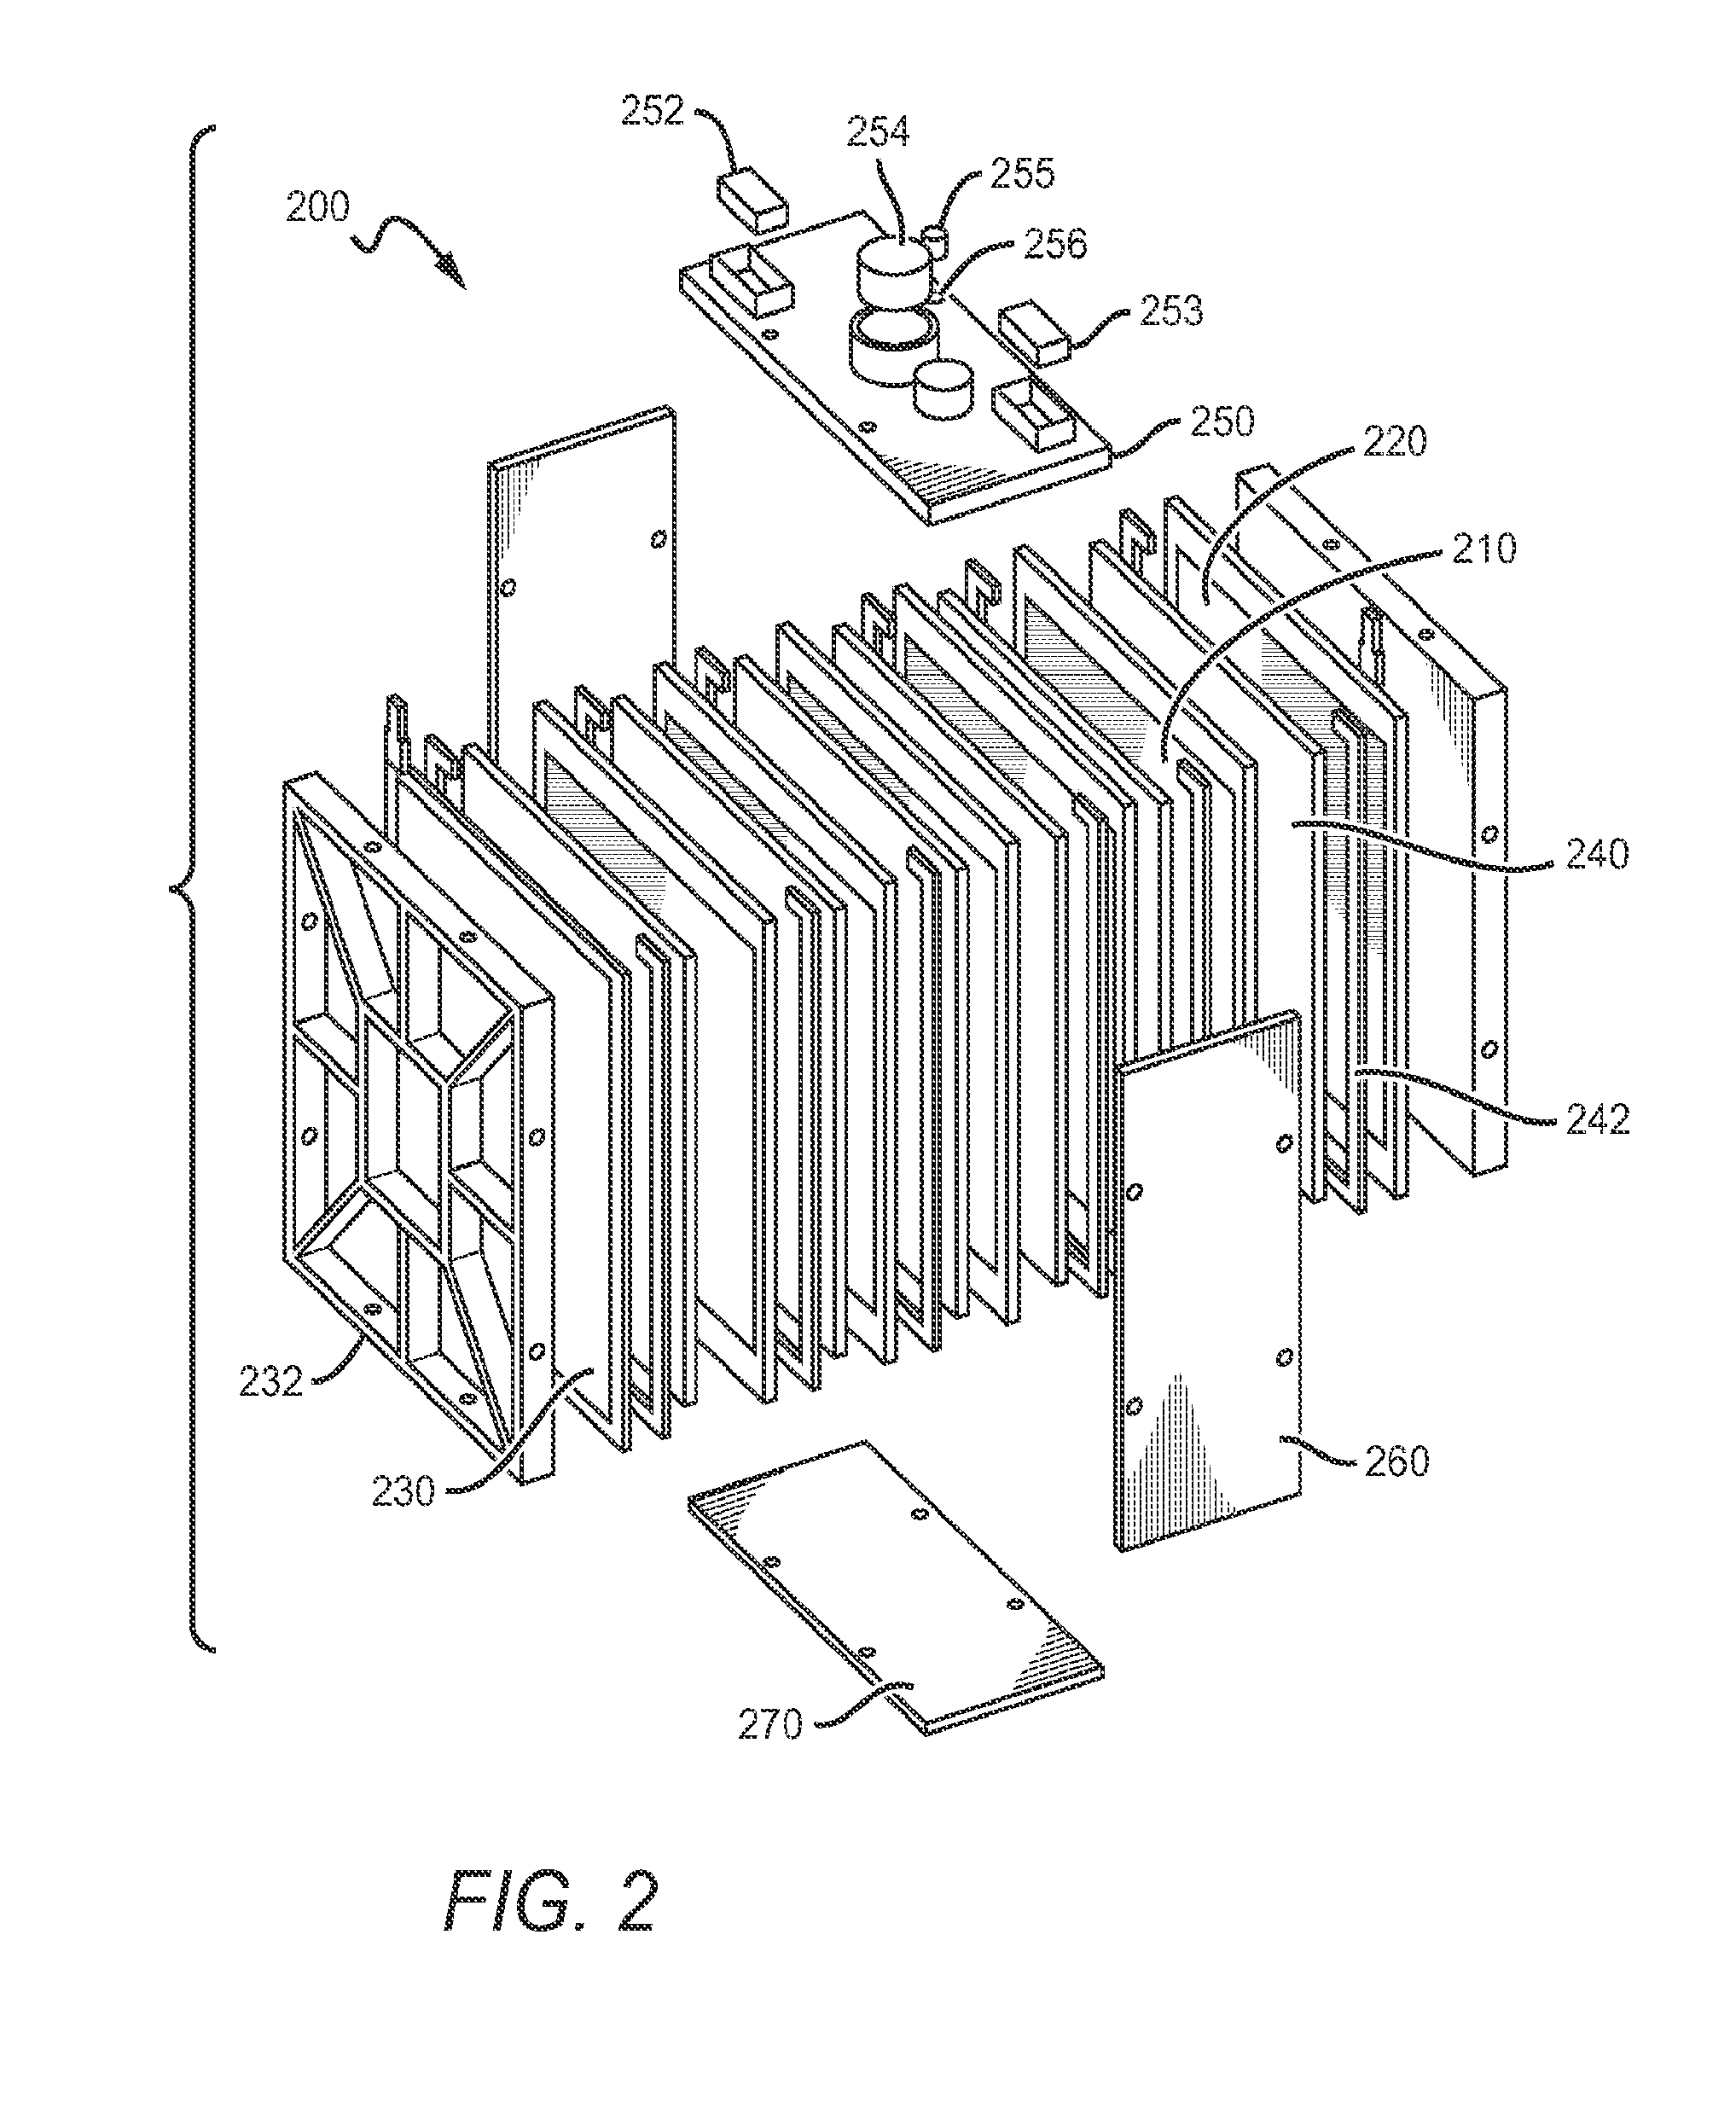 Light-weight bipolar valve regulated lead acid batteries and methods therefor